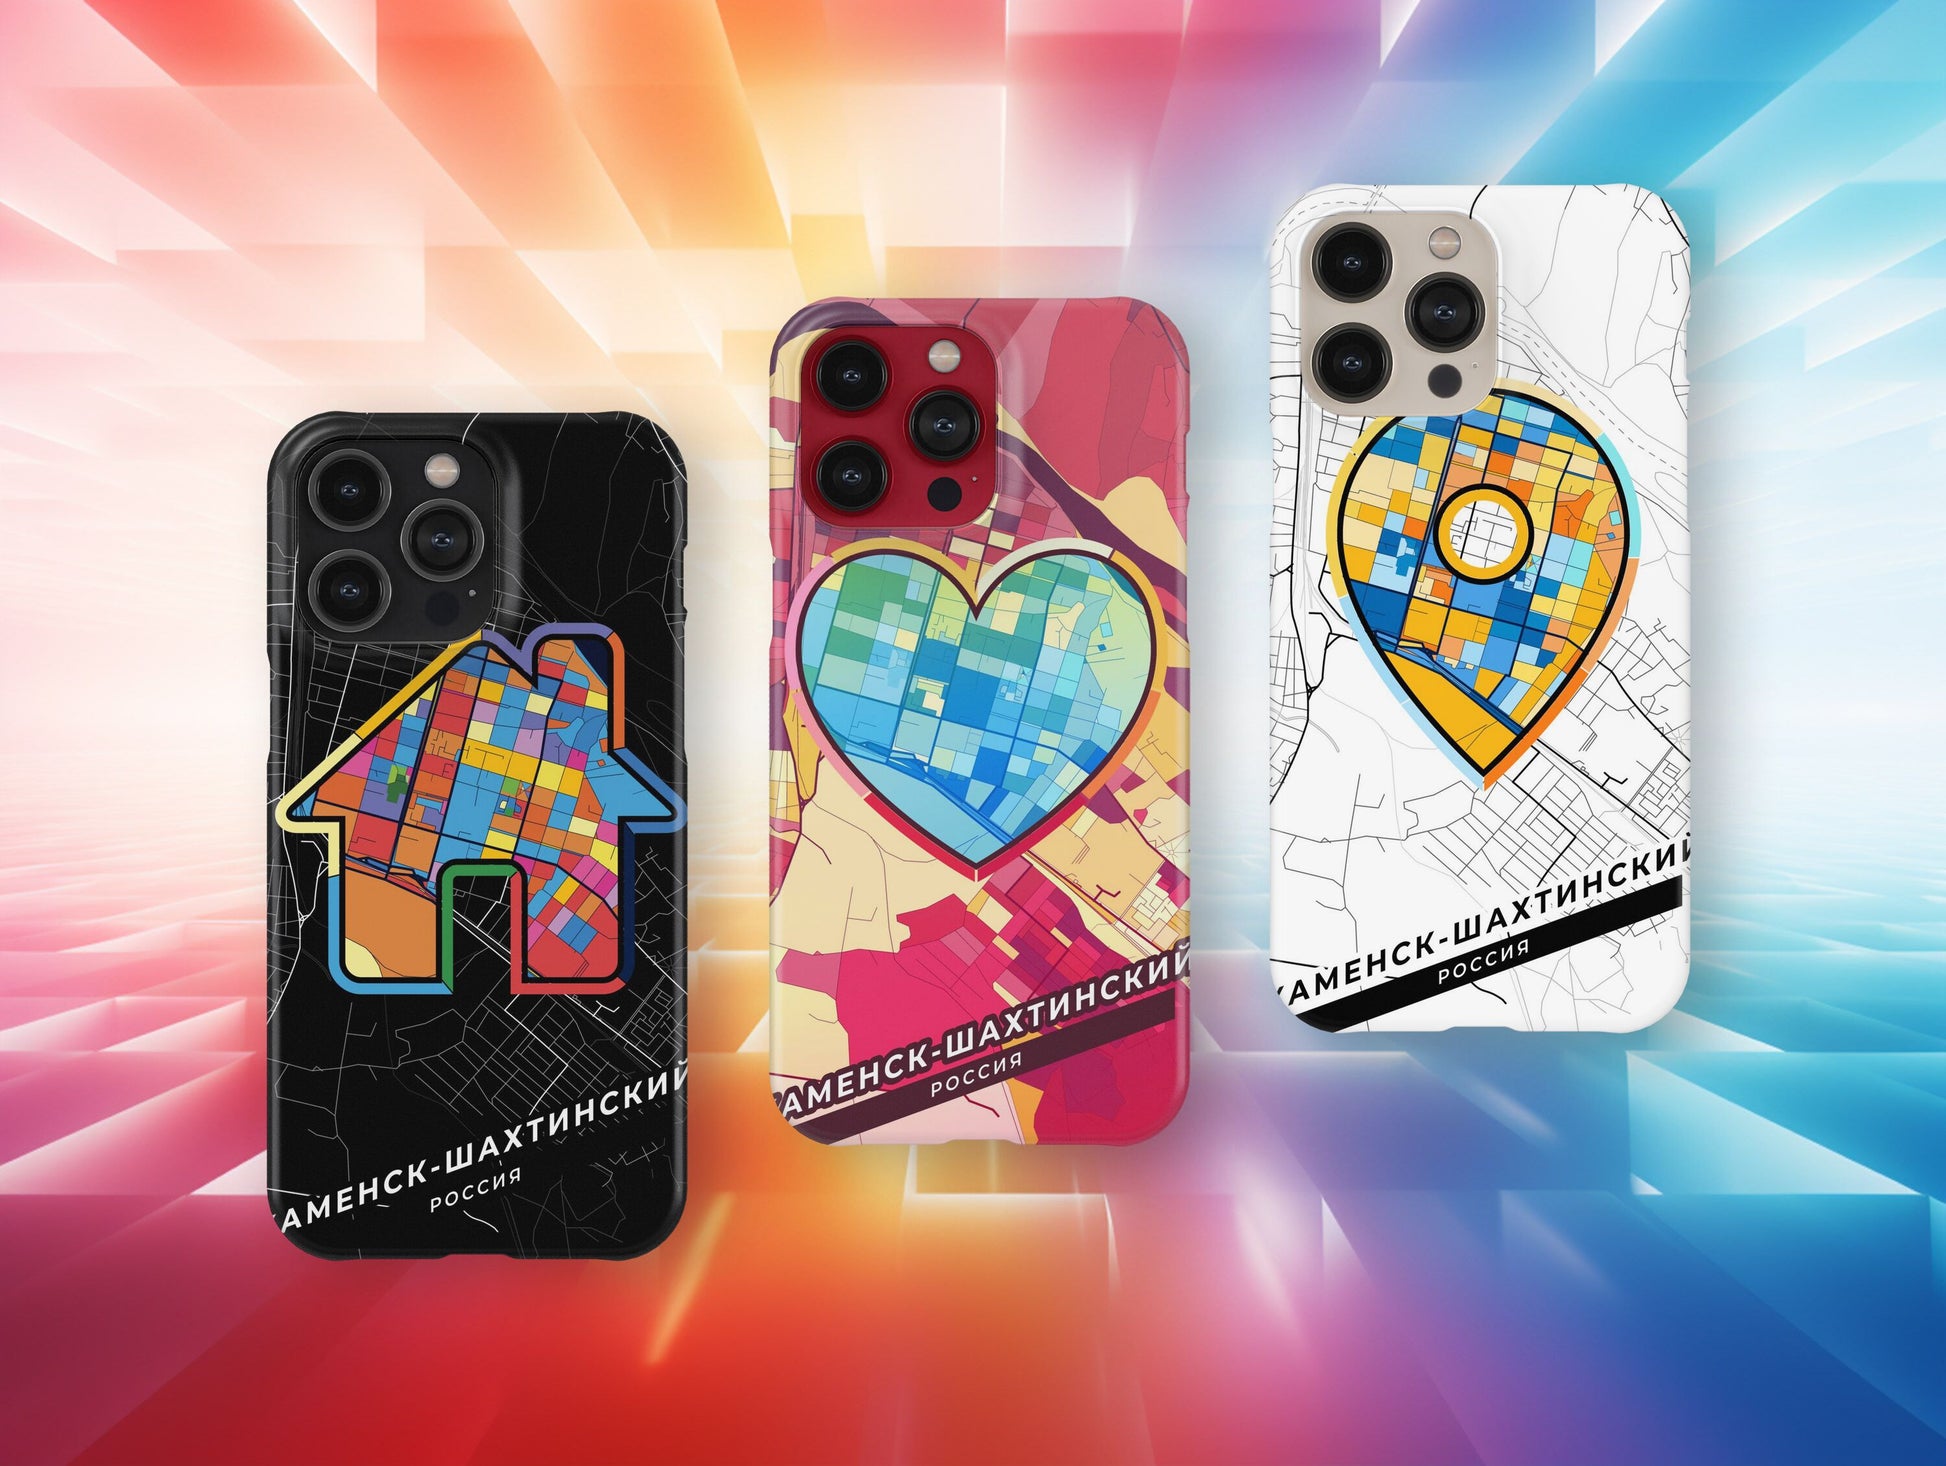 Kamensk-Shakhtinsky Russia slim phone case with colorful icon. Birthday, wedding or housewarming gift. Couple match cases.